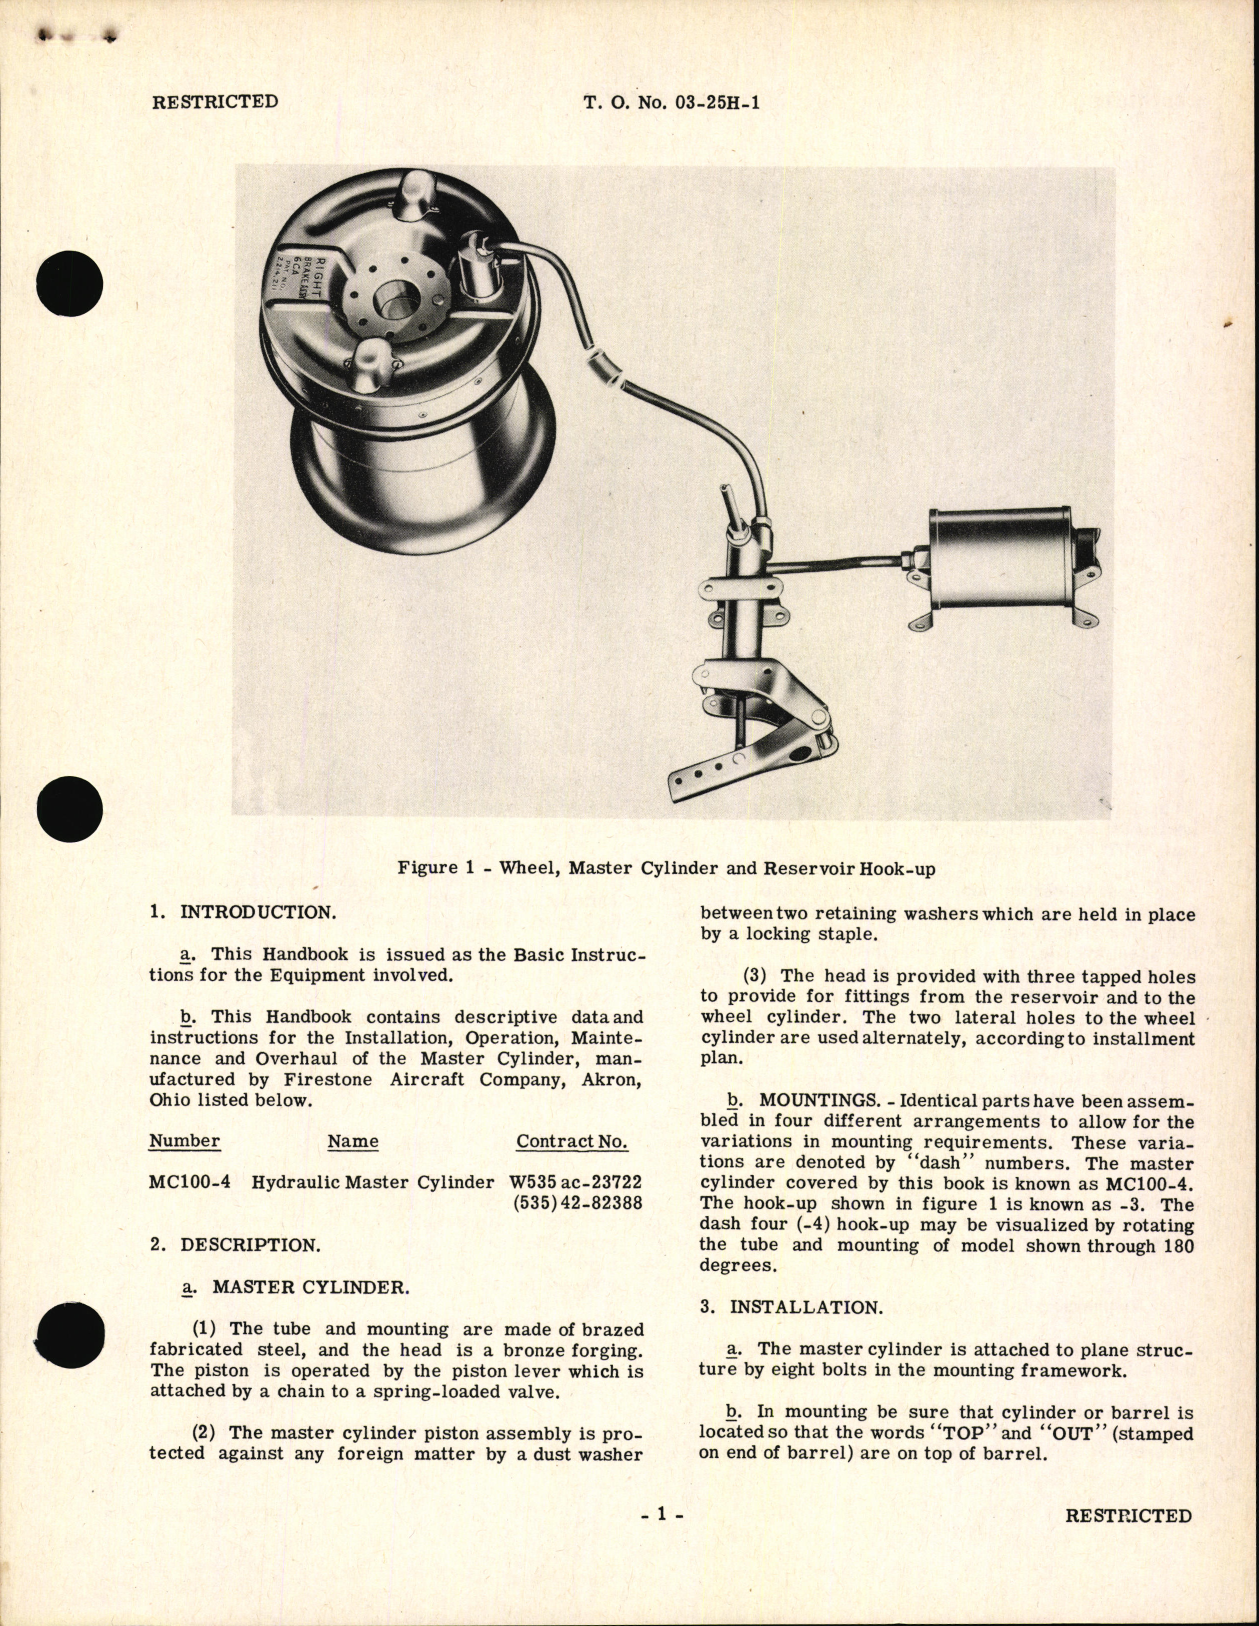 Sample page 5 from AirCorps Library document: Handbook of Instructions with Parts Catalog for Model MC100 Hydraulic Master Cylinder